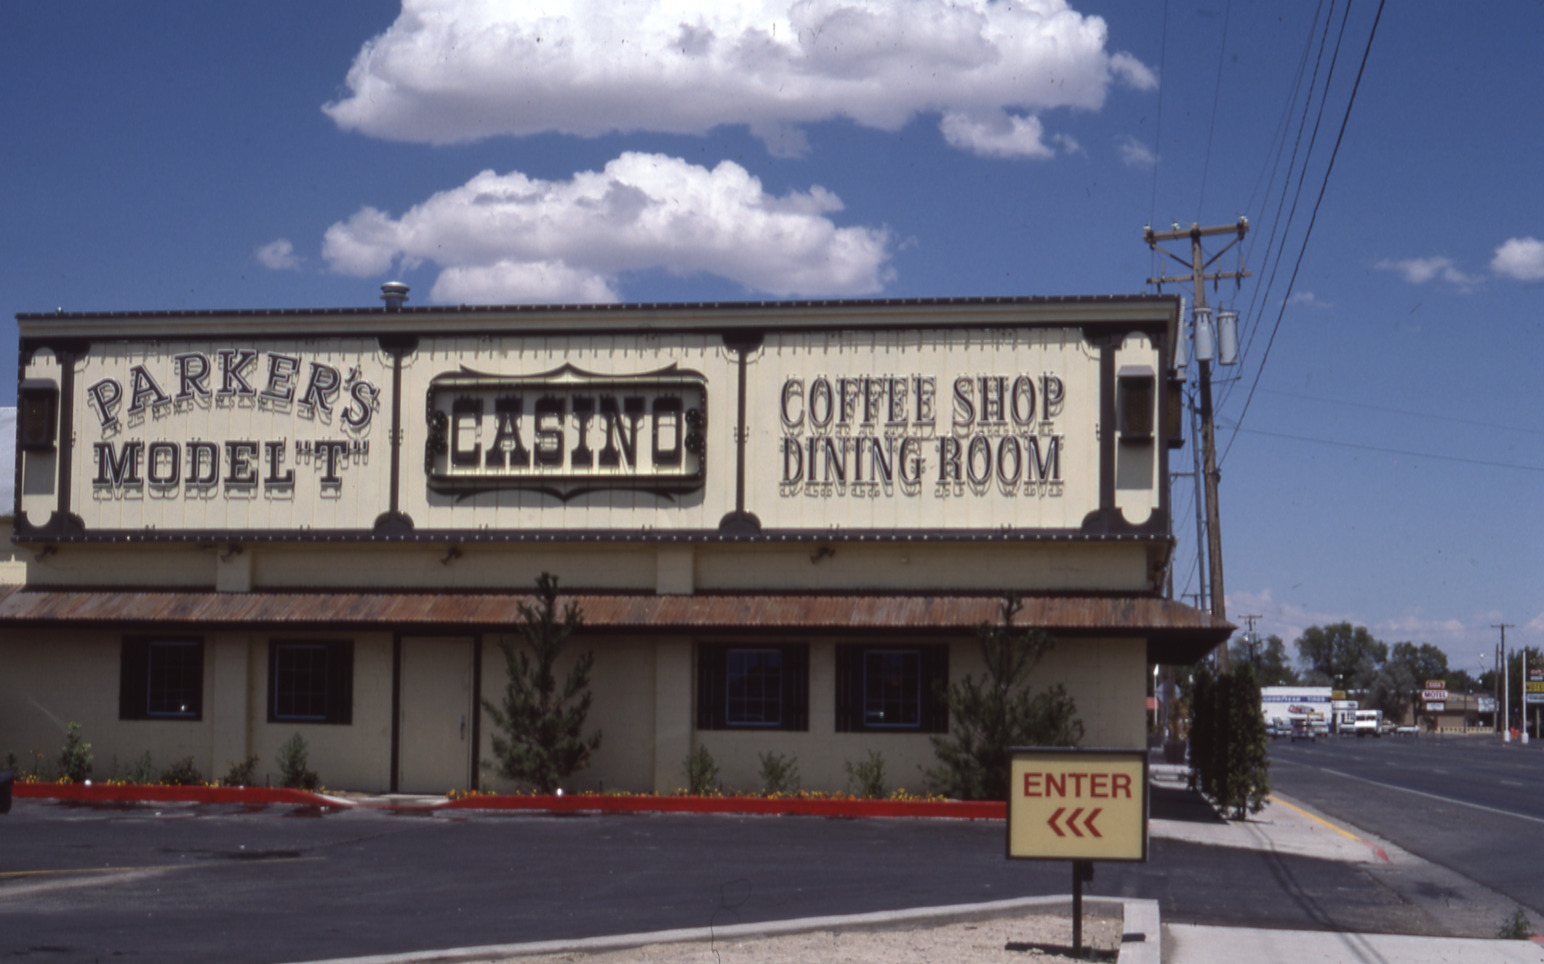 Parker's Model "T" Casino wall signs, Winnemucca, Nevada: photographic print